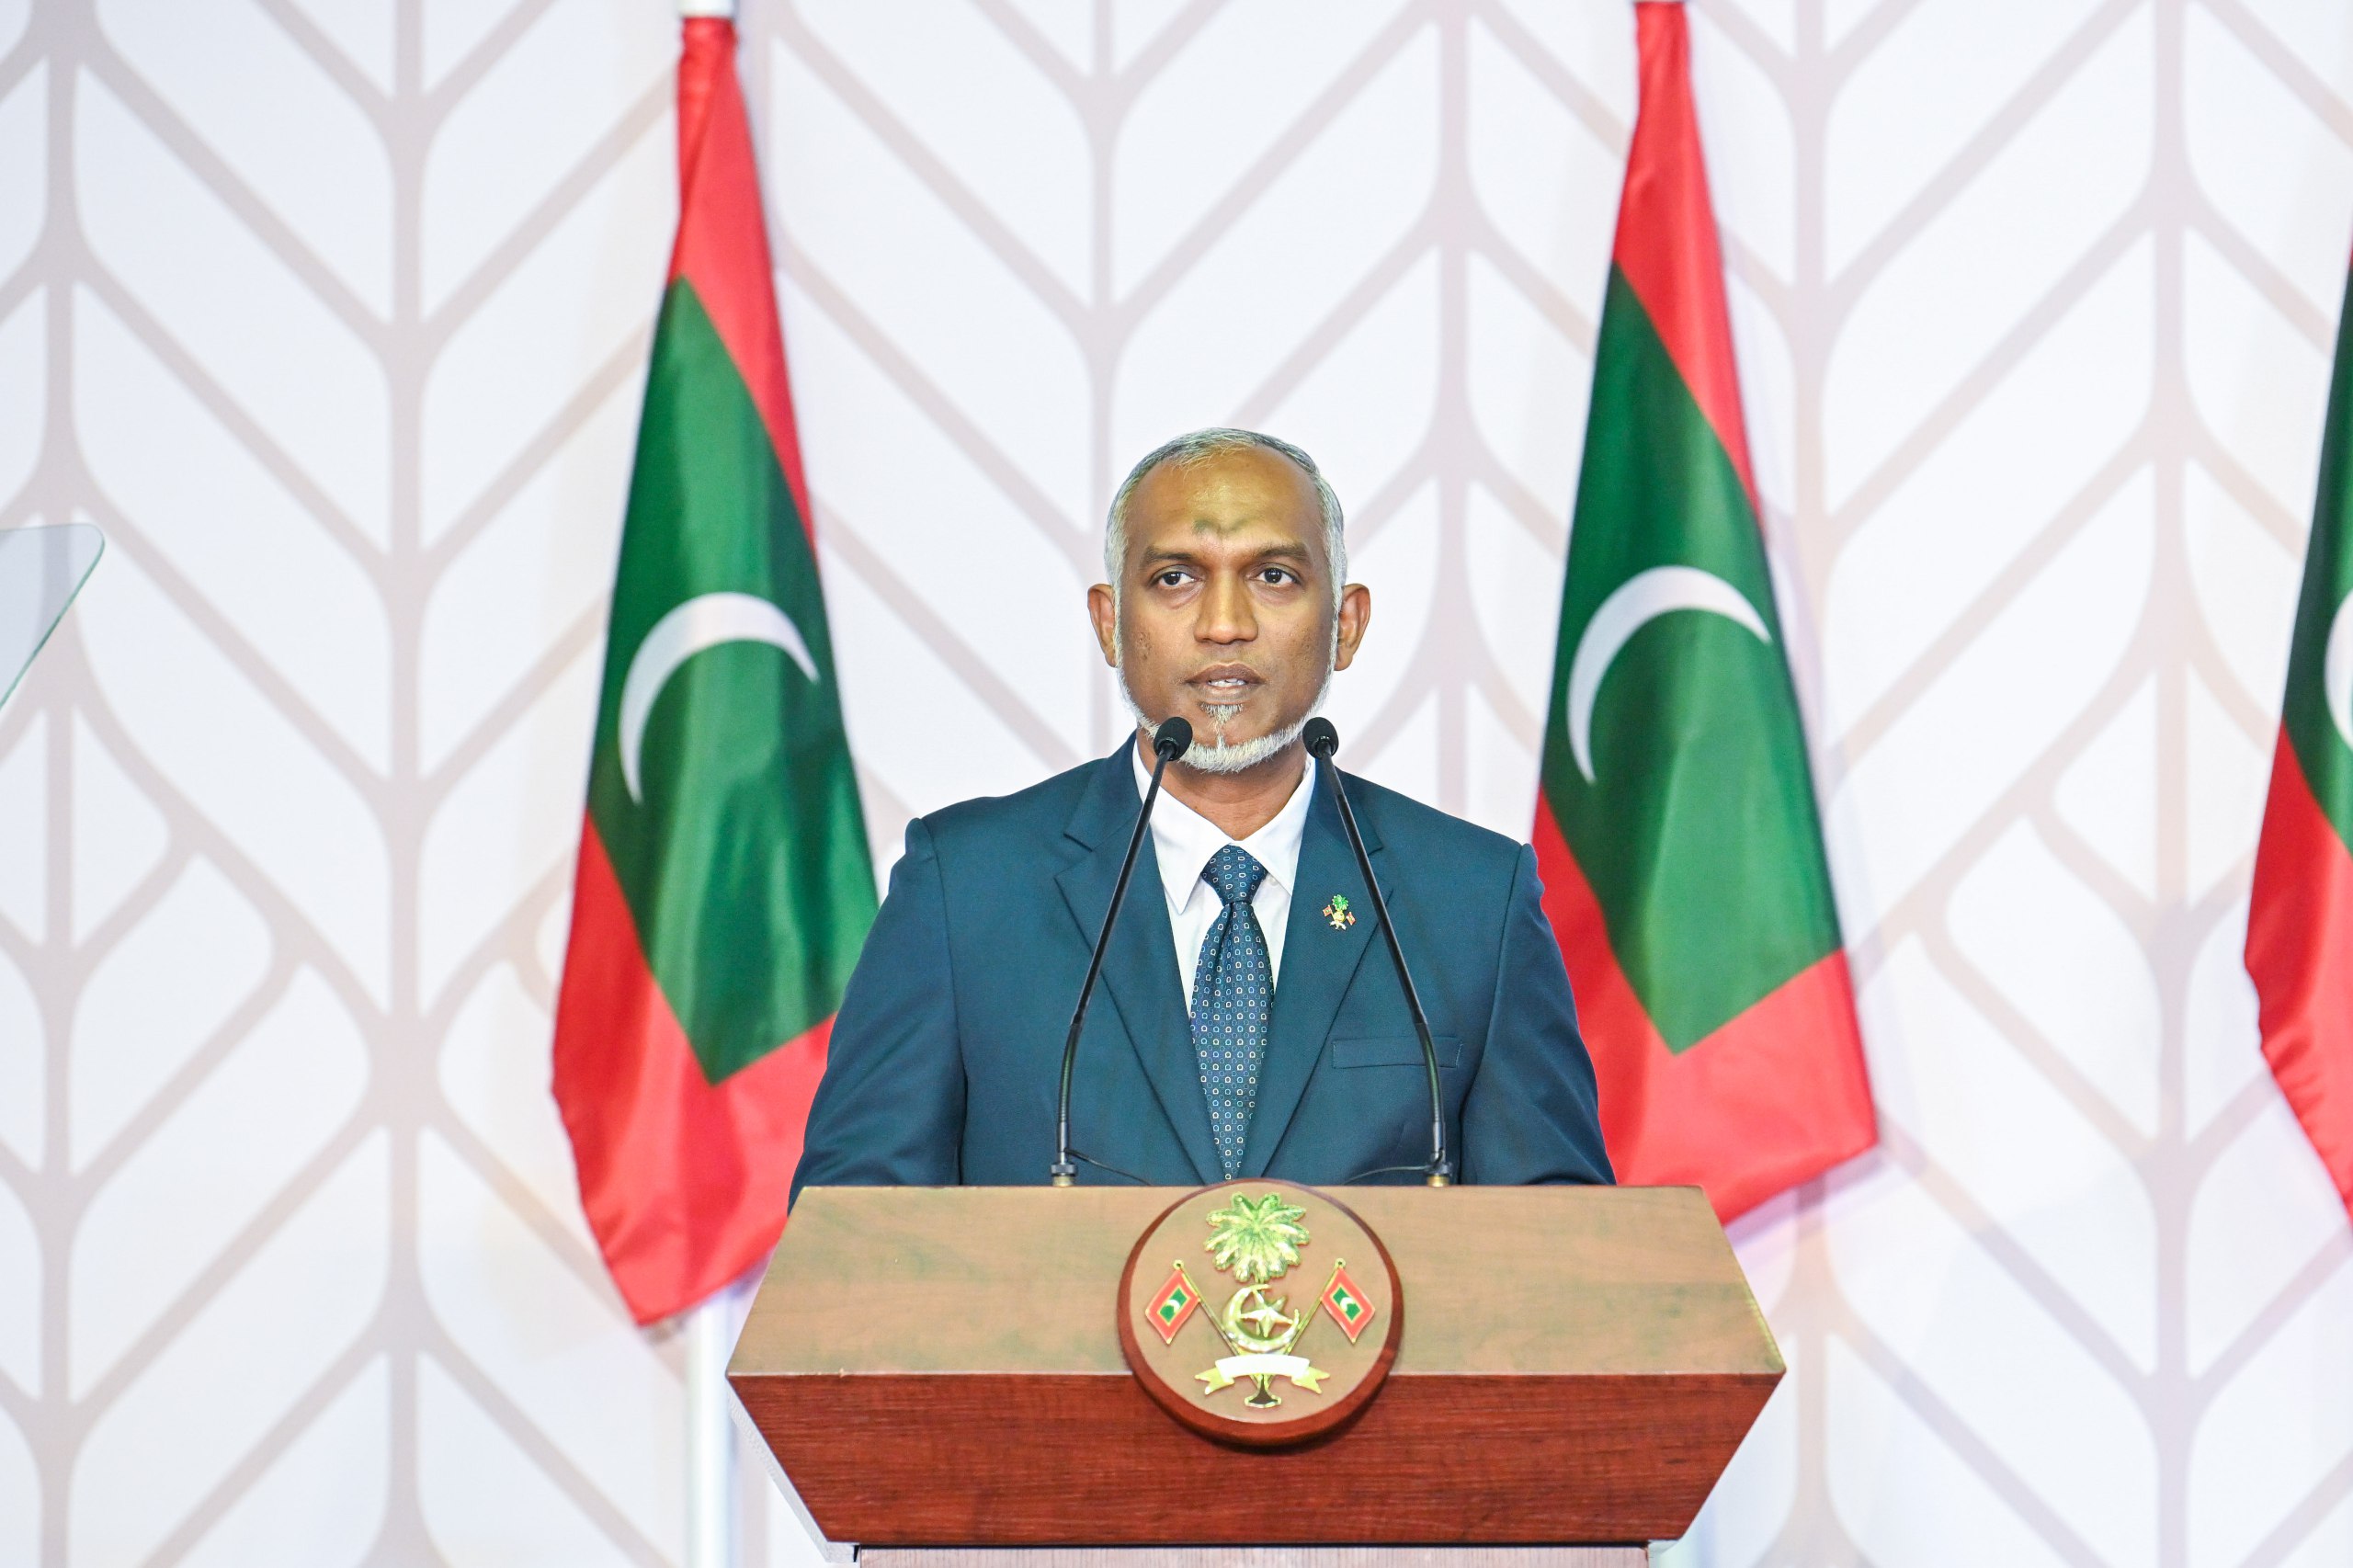 President Dr Muizzu calls on the international community to build on the UN Security Council resolution and take concrete steps to end all hostilities